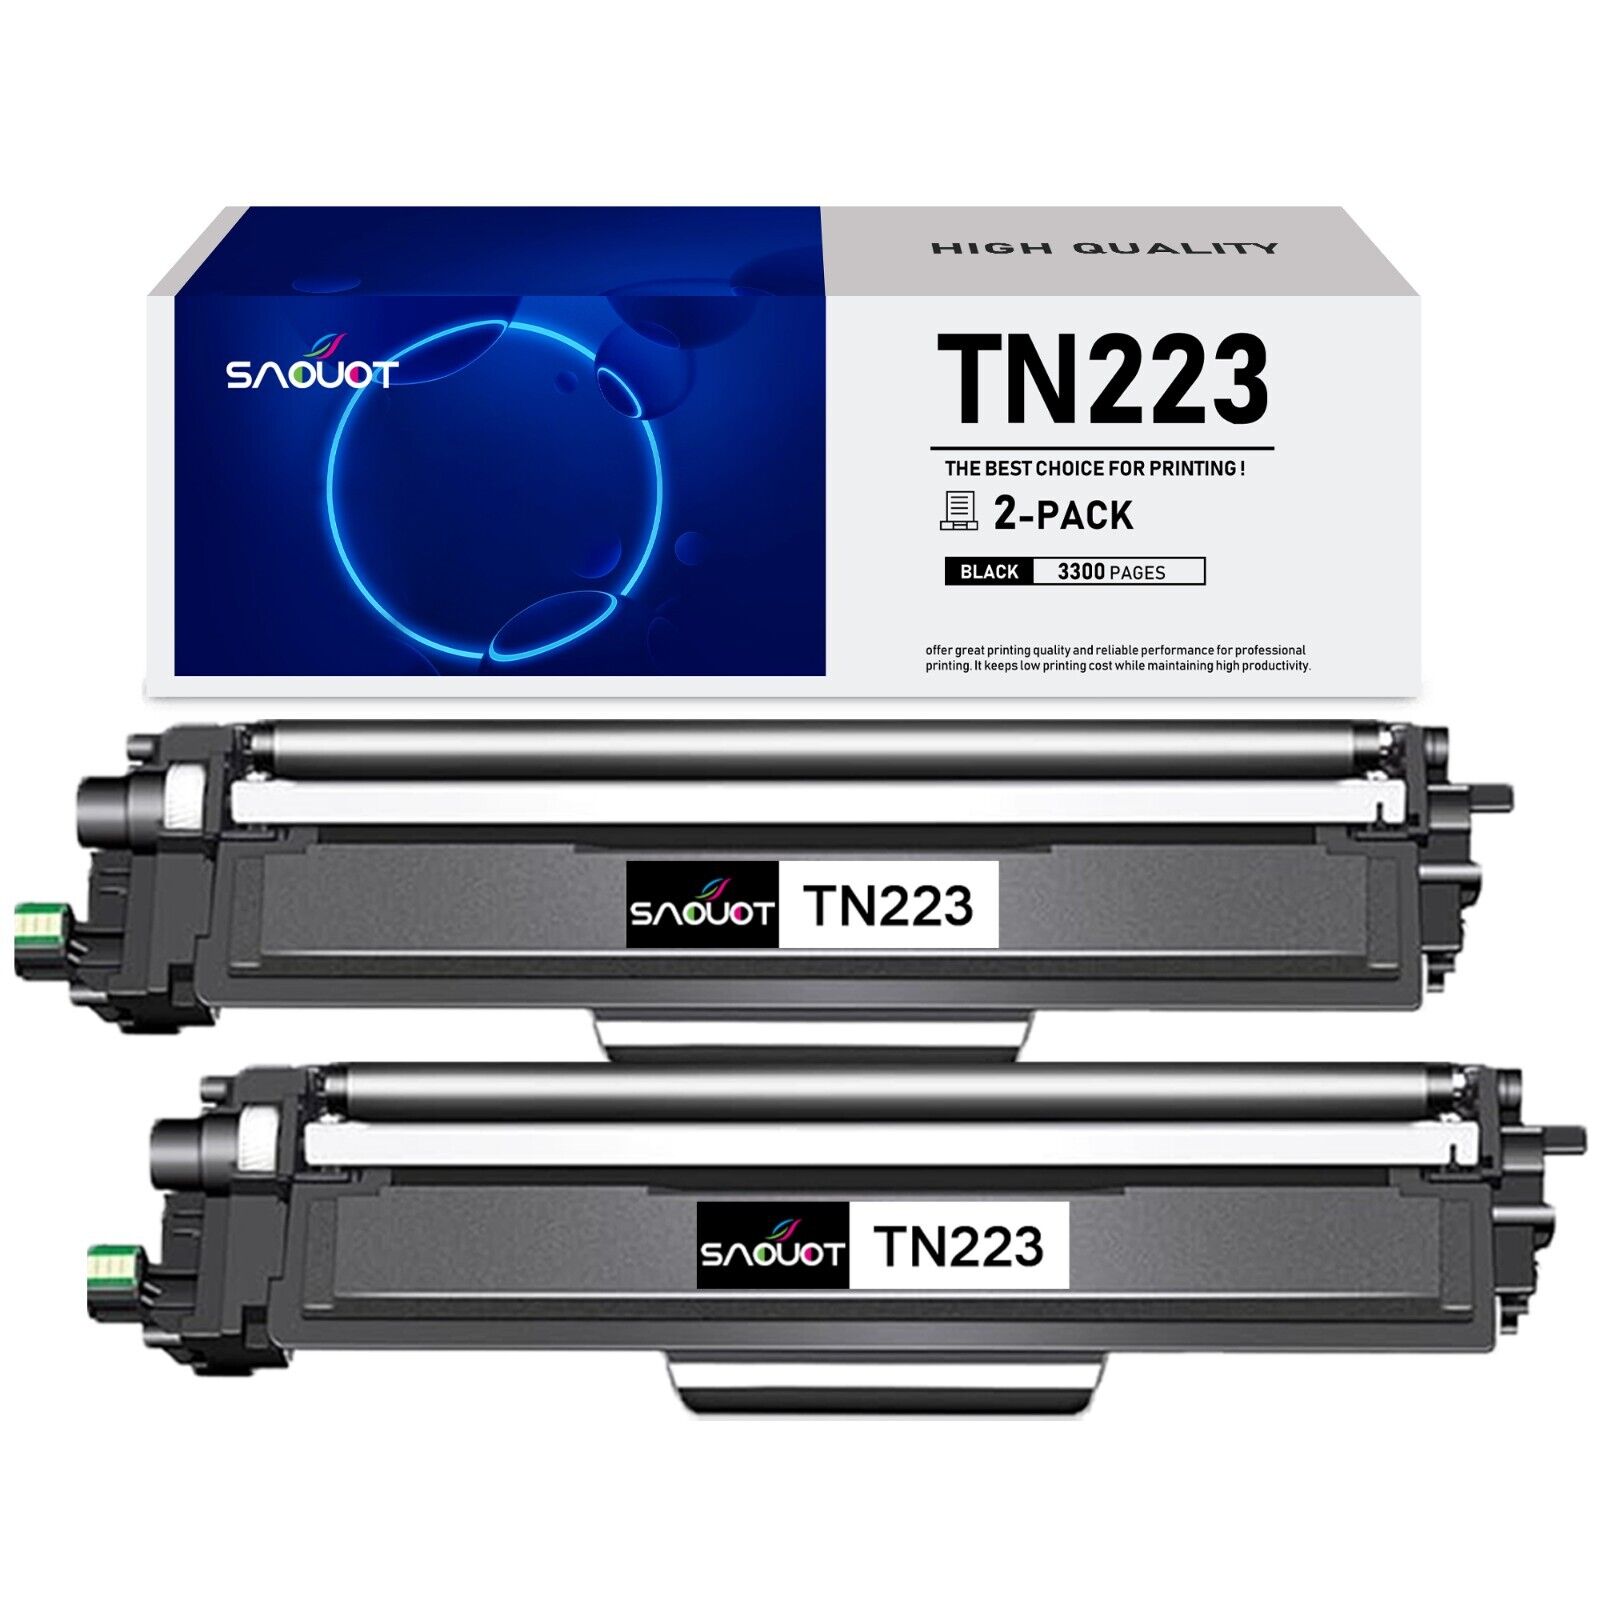 TN223 Toner Cartridge Replacement for Brother HL-L3290CDW L3210CW MFC-L3750CDW